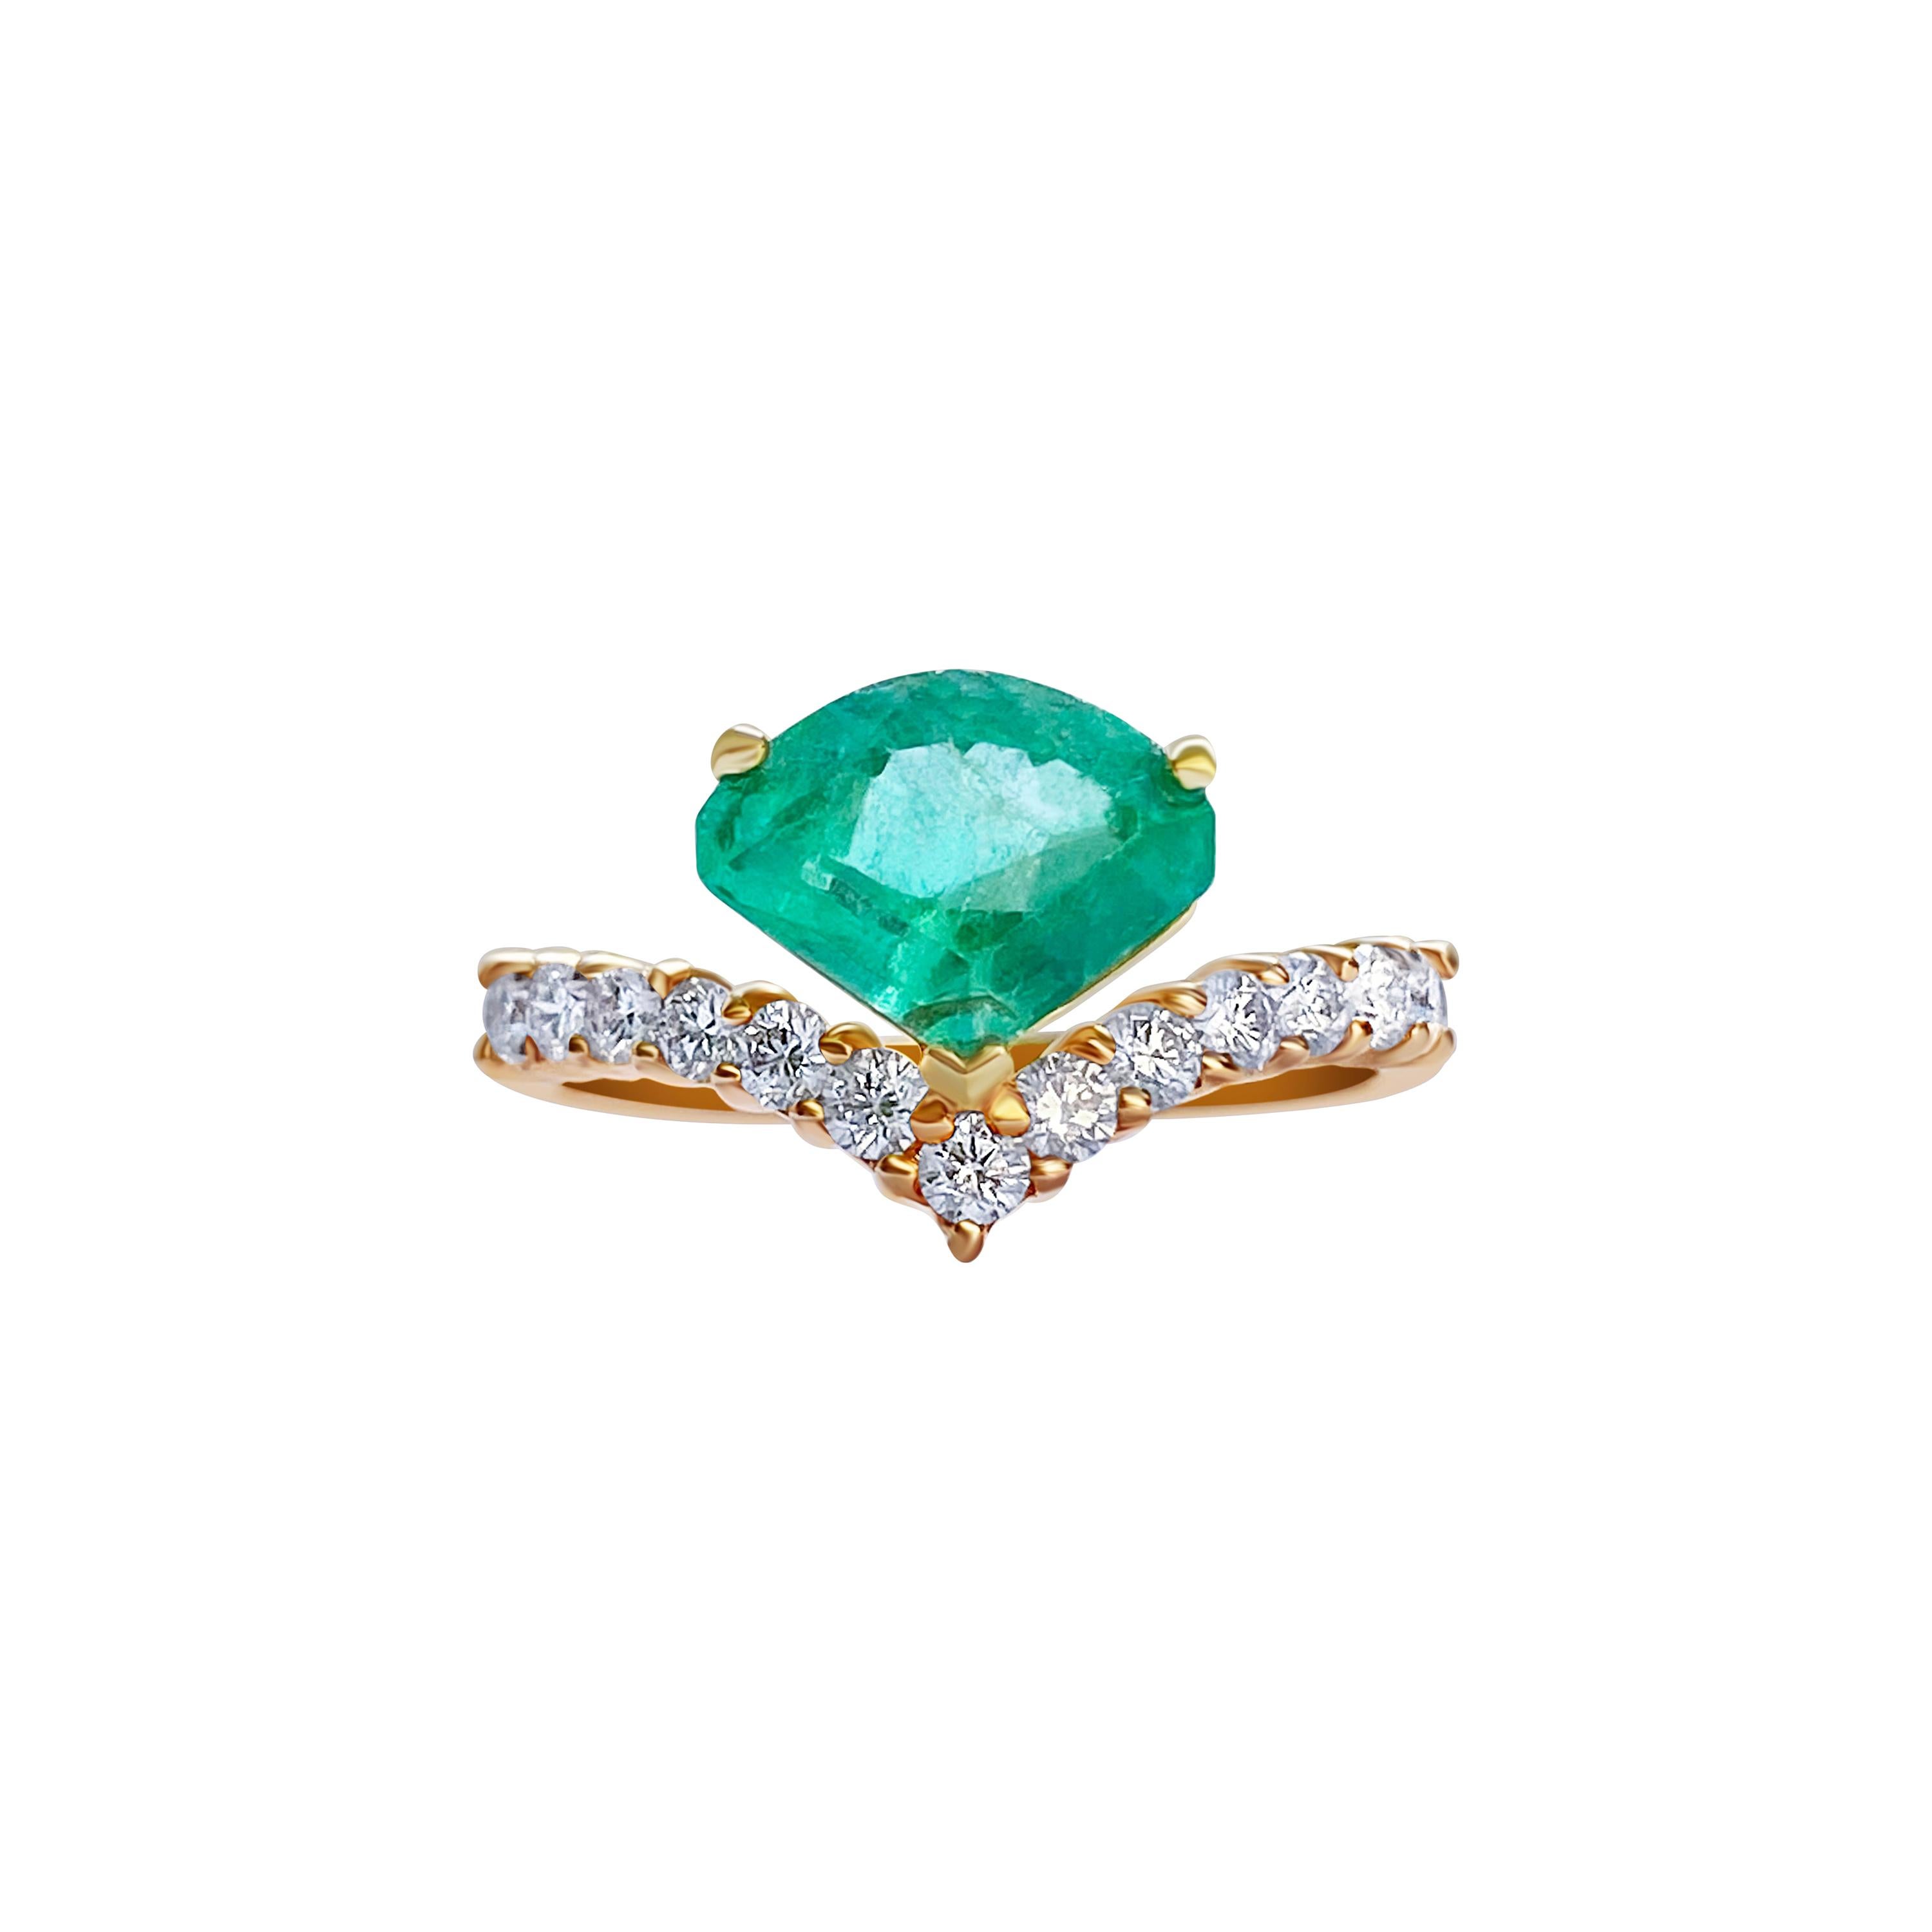 Kite Shape Colombian Emerald in 18k Rose Gold Ring